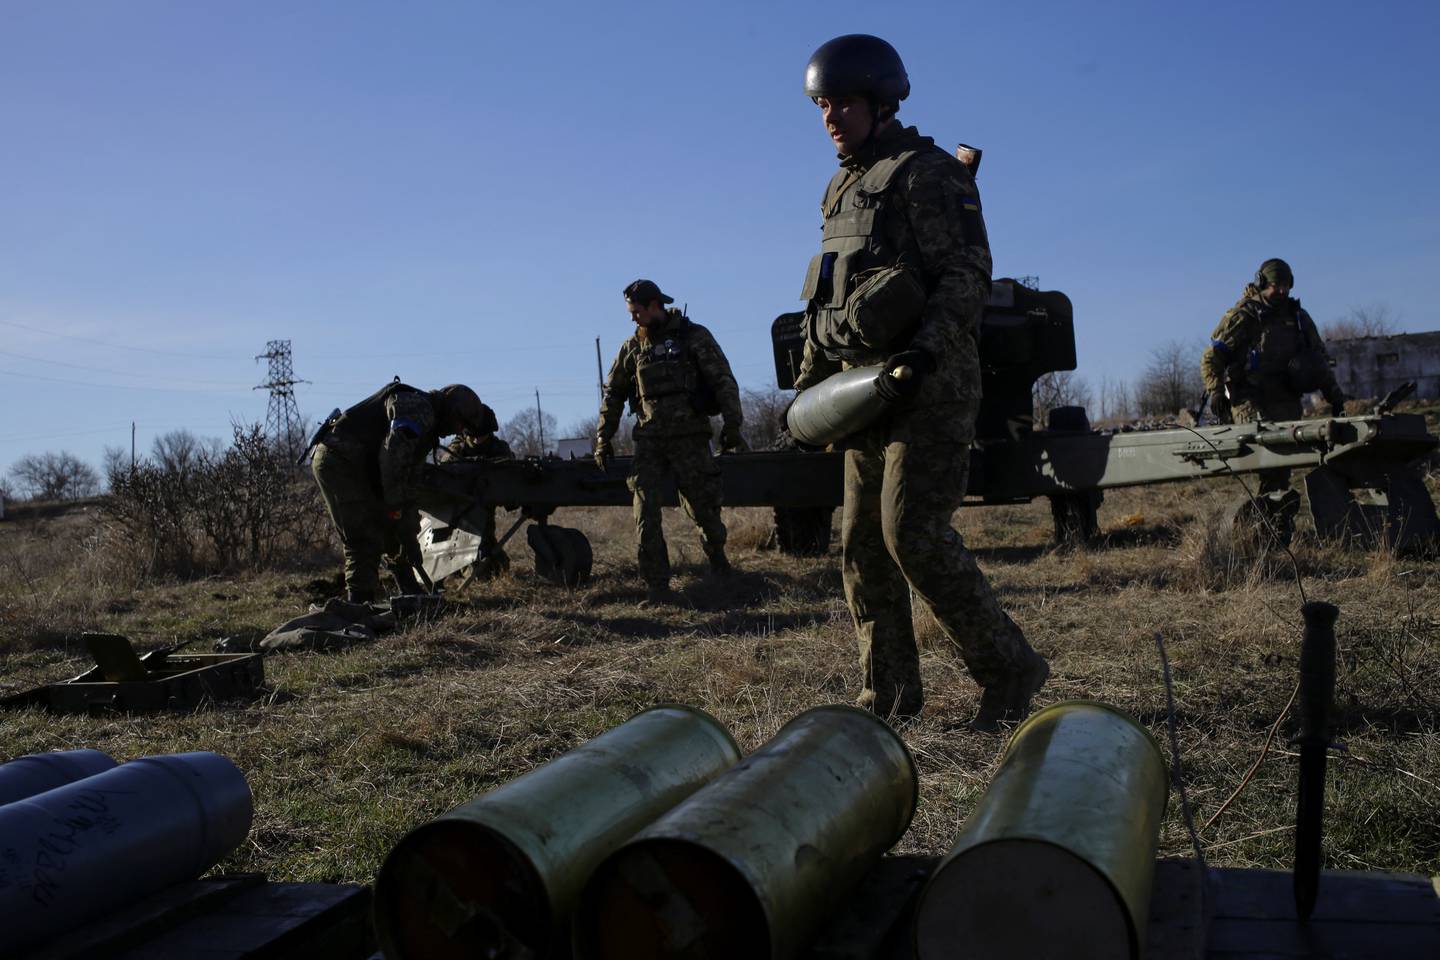 Members of the Ukrainian Volunteer Corps prepare a howitzer, as Russia's attack on Ukraine continues. Reuters